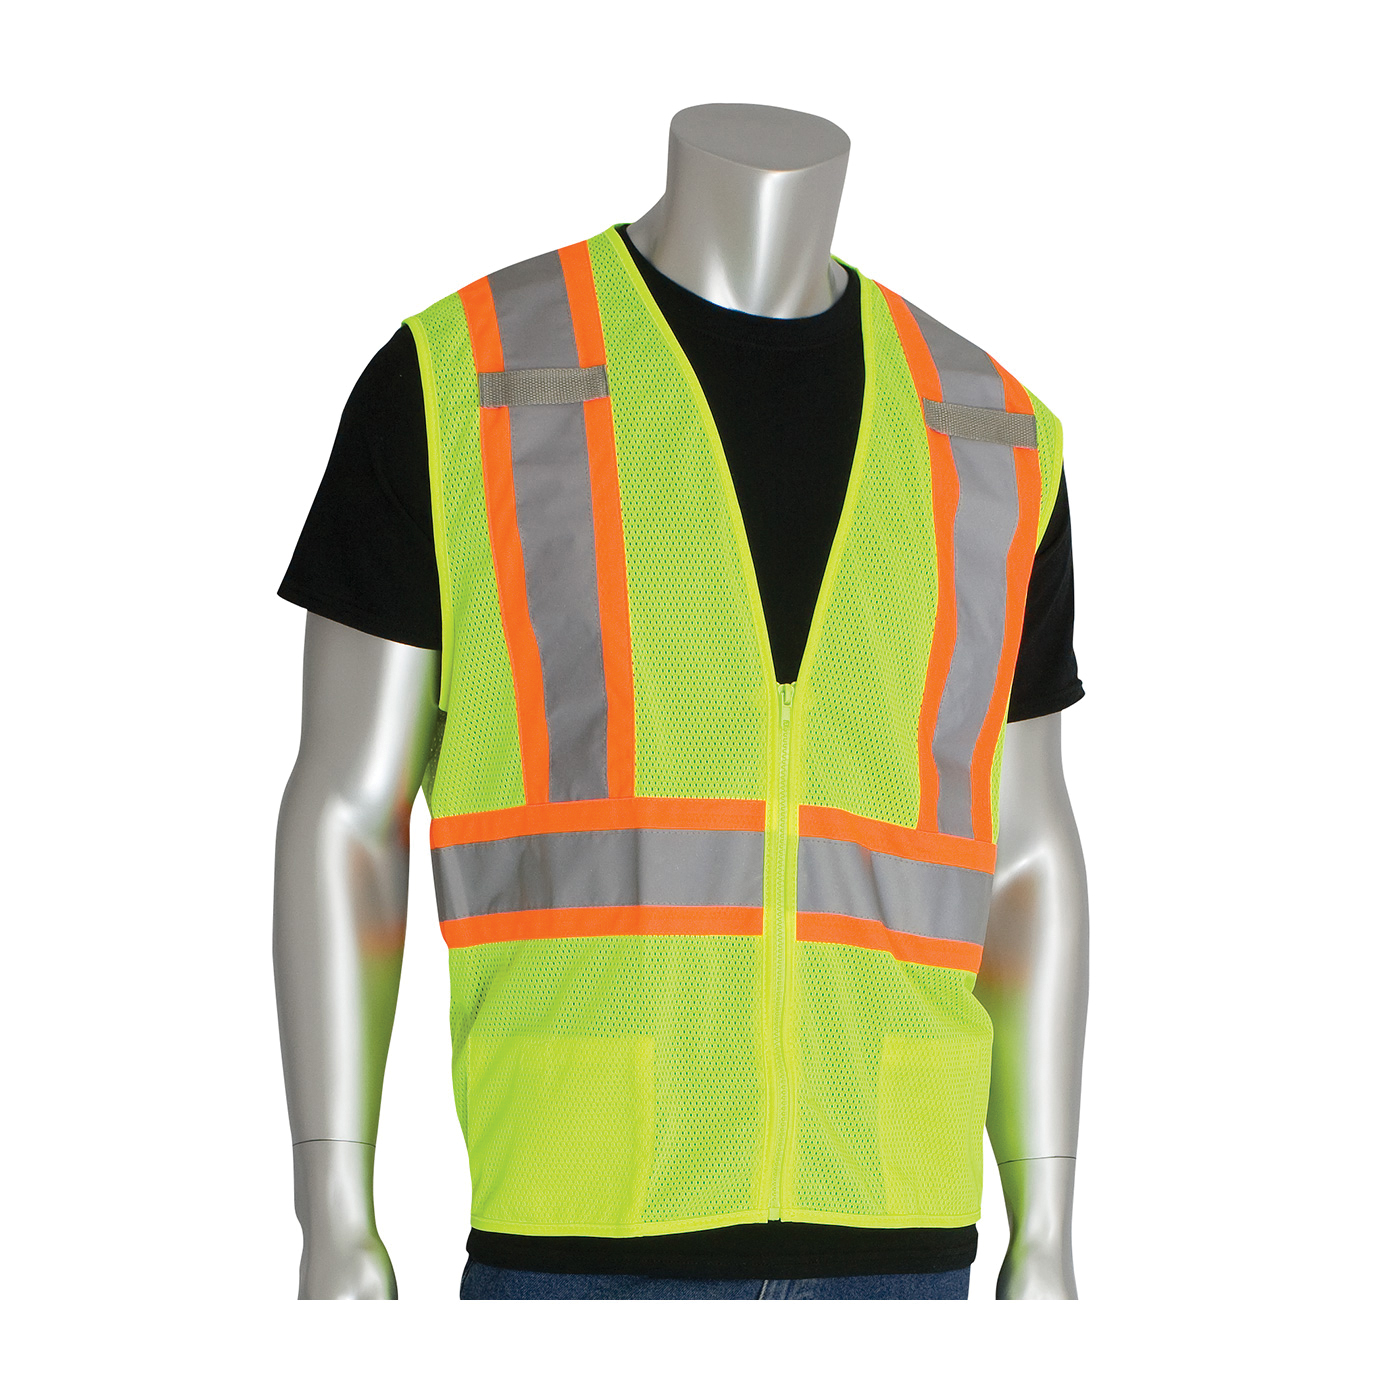 PIP® 302-0600D-LY/S 2-Tone Safety Access Vest With "D" Ring Access, S, Hi-Viz Lime Yellow, Polyester, Zipper Closure, 2 Pockets, ANSI Class: Class 2, Specifications Met: ANSI 107 Type R